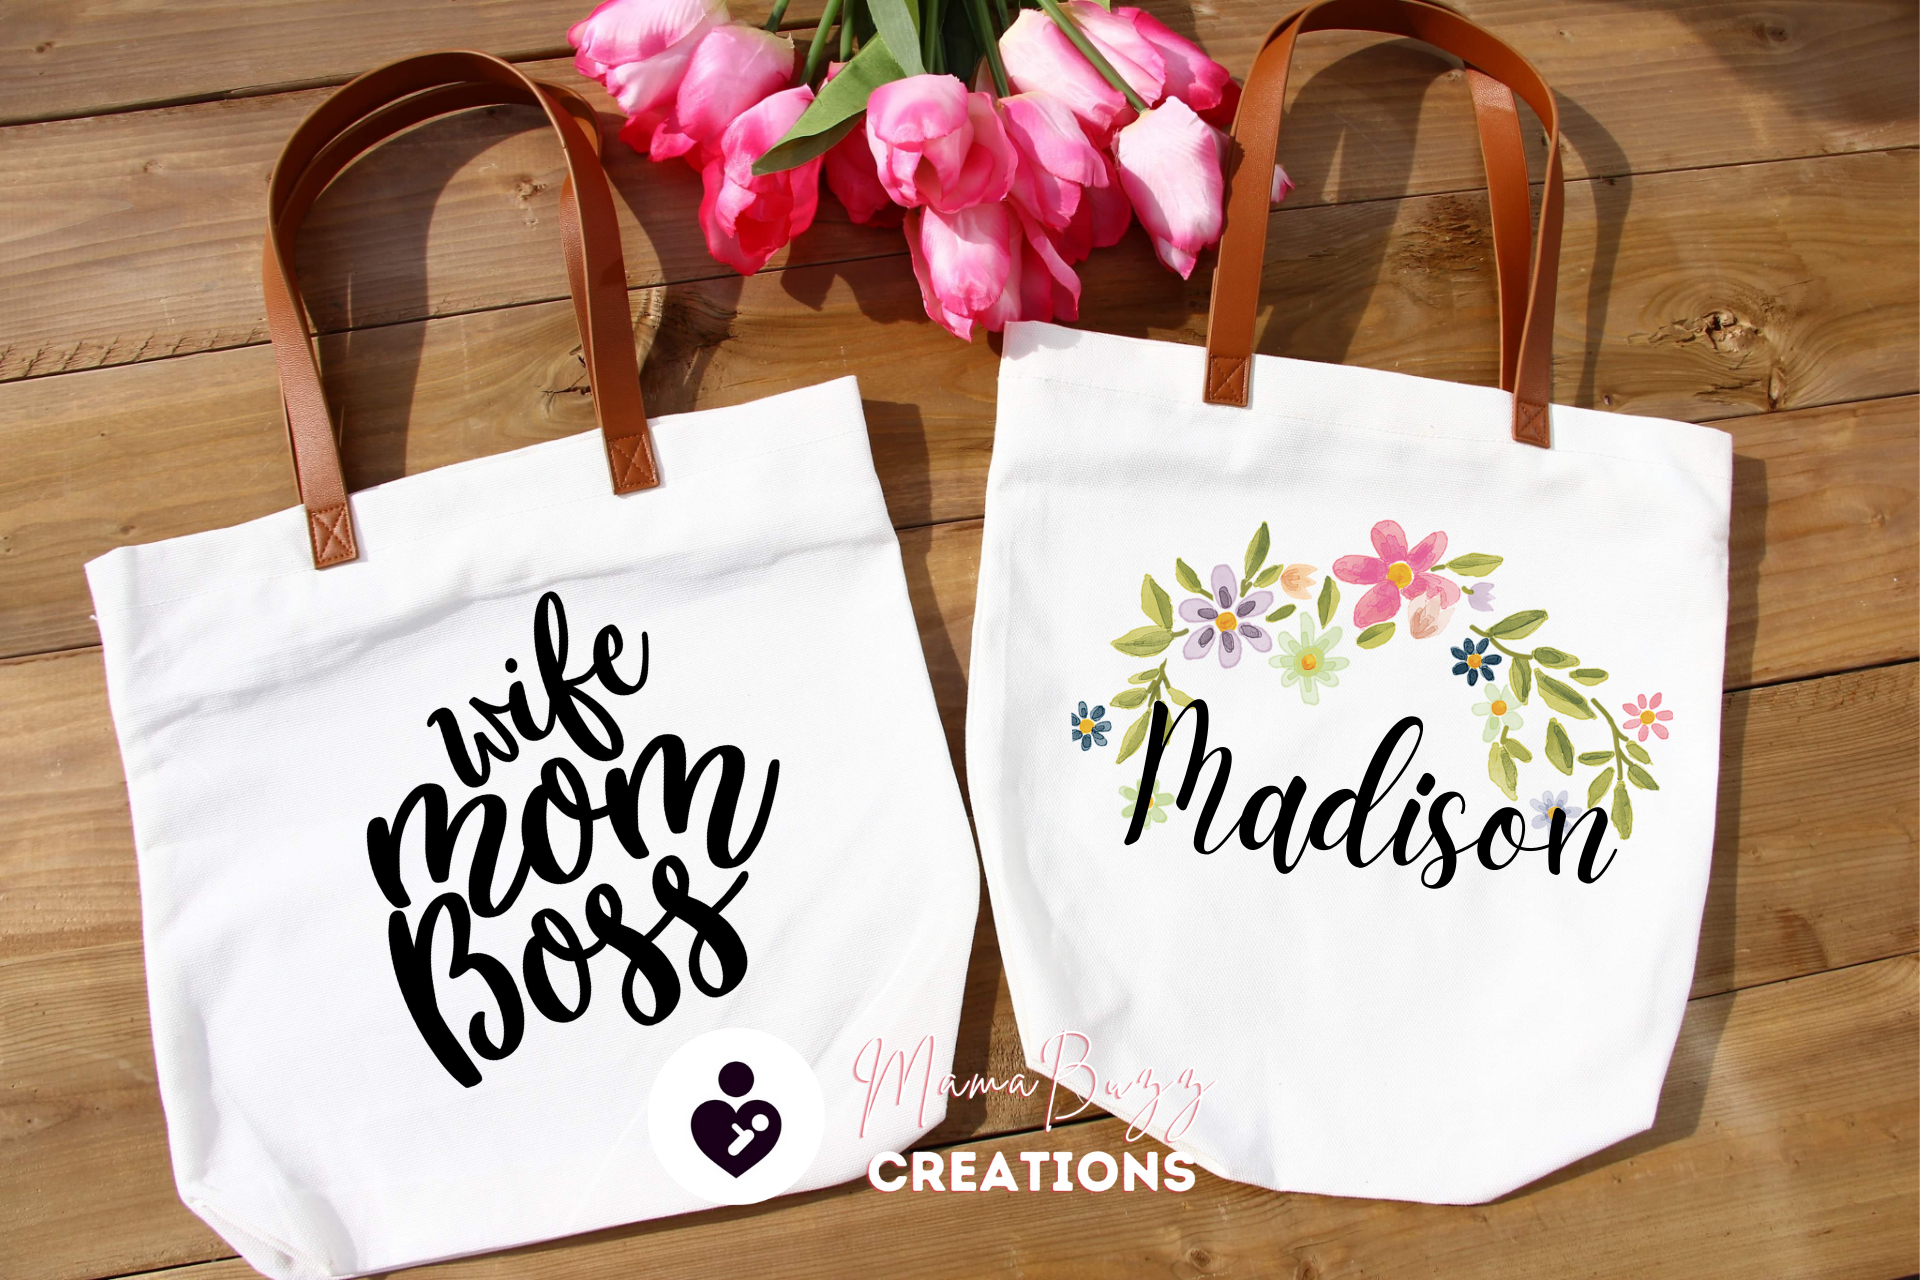 "Wife-Mom-Boss" Tote Bag, Gift for her, Mom's Gift, Personalized gifts, Gifts for her - MamaBuzz Creations